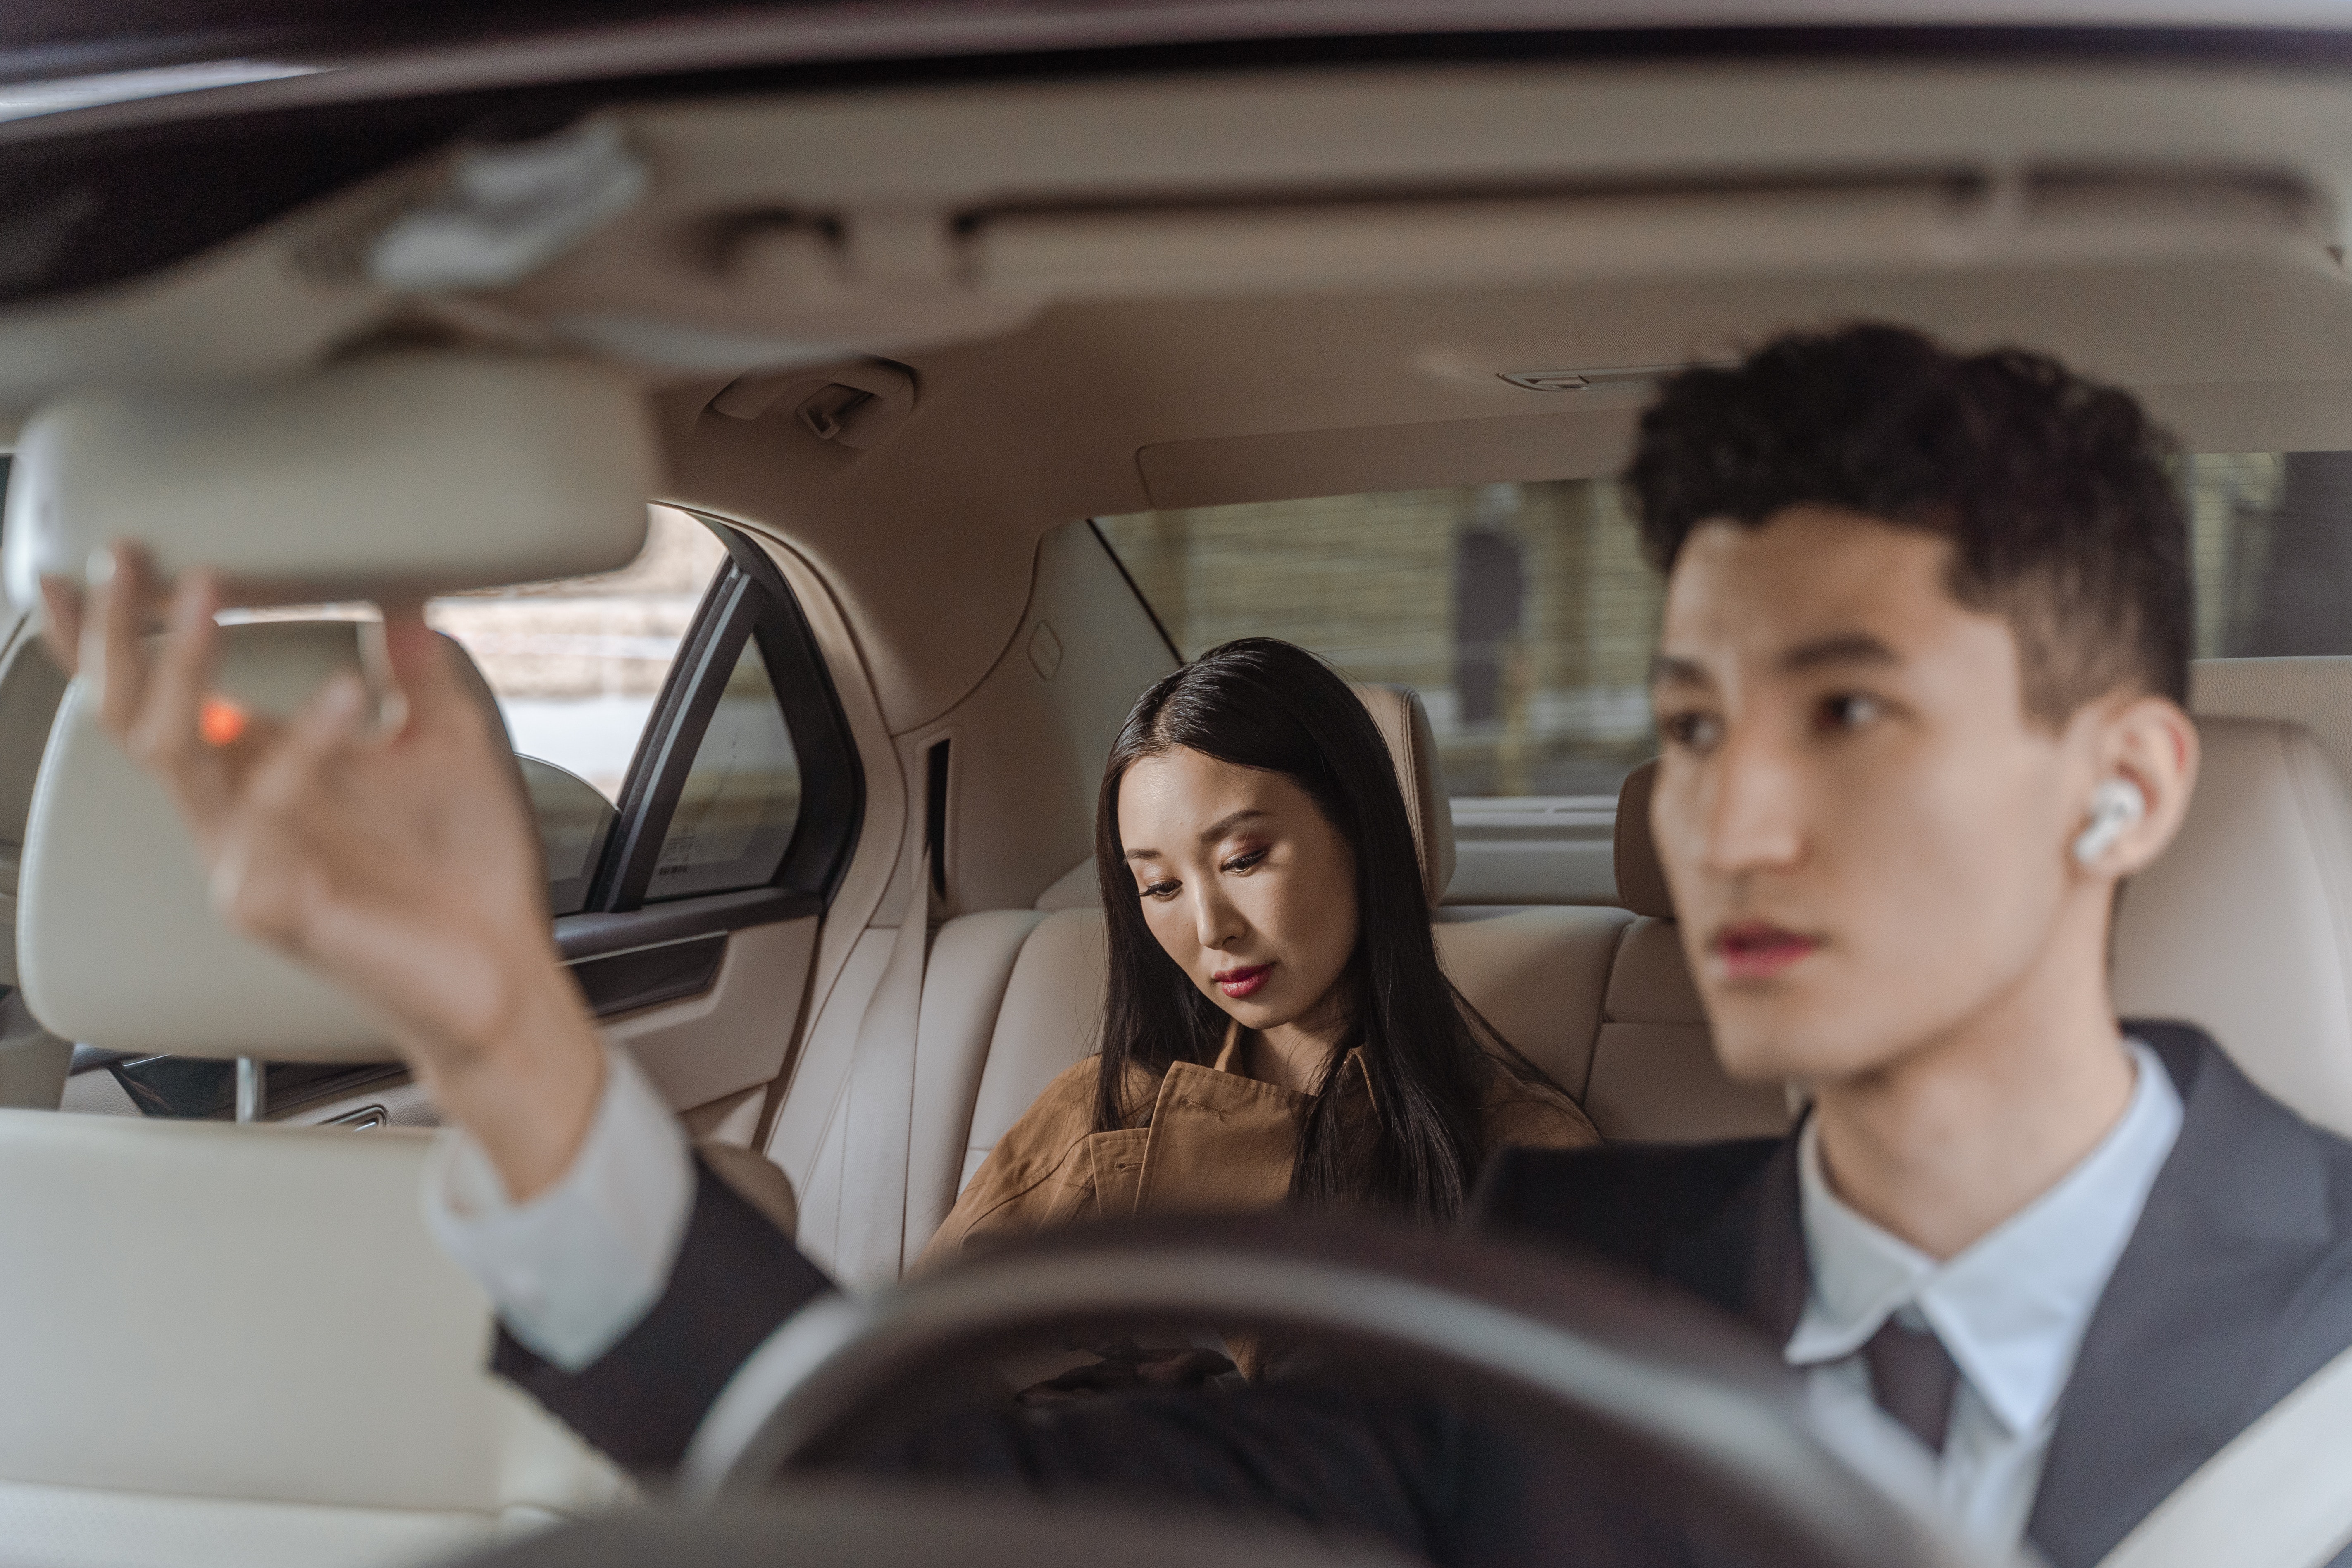 #7 Reasons People Hire a Chauffeur to Drive Them Around